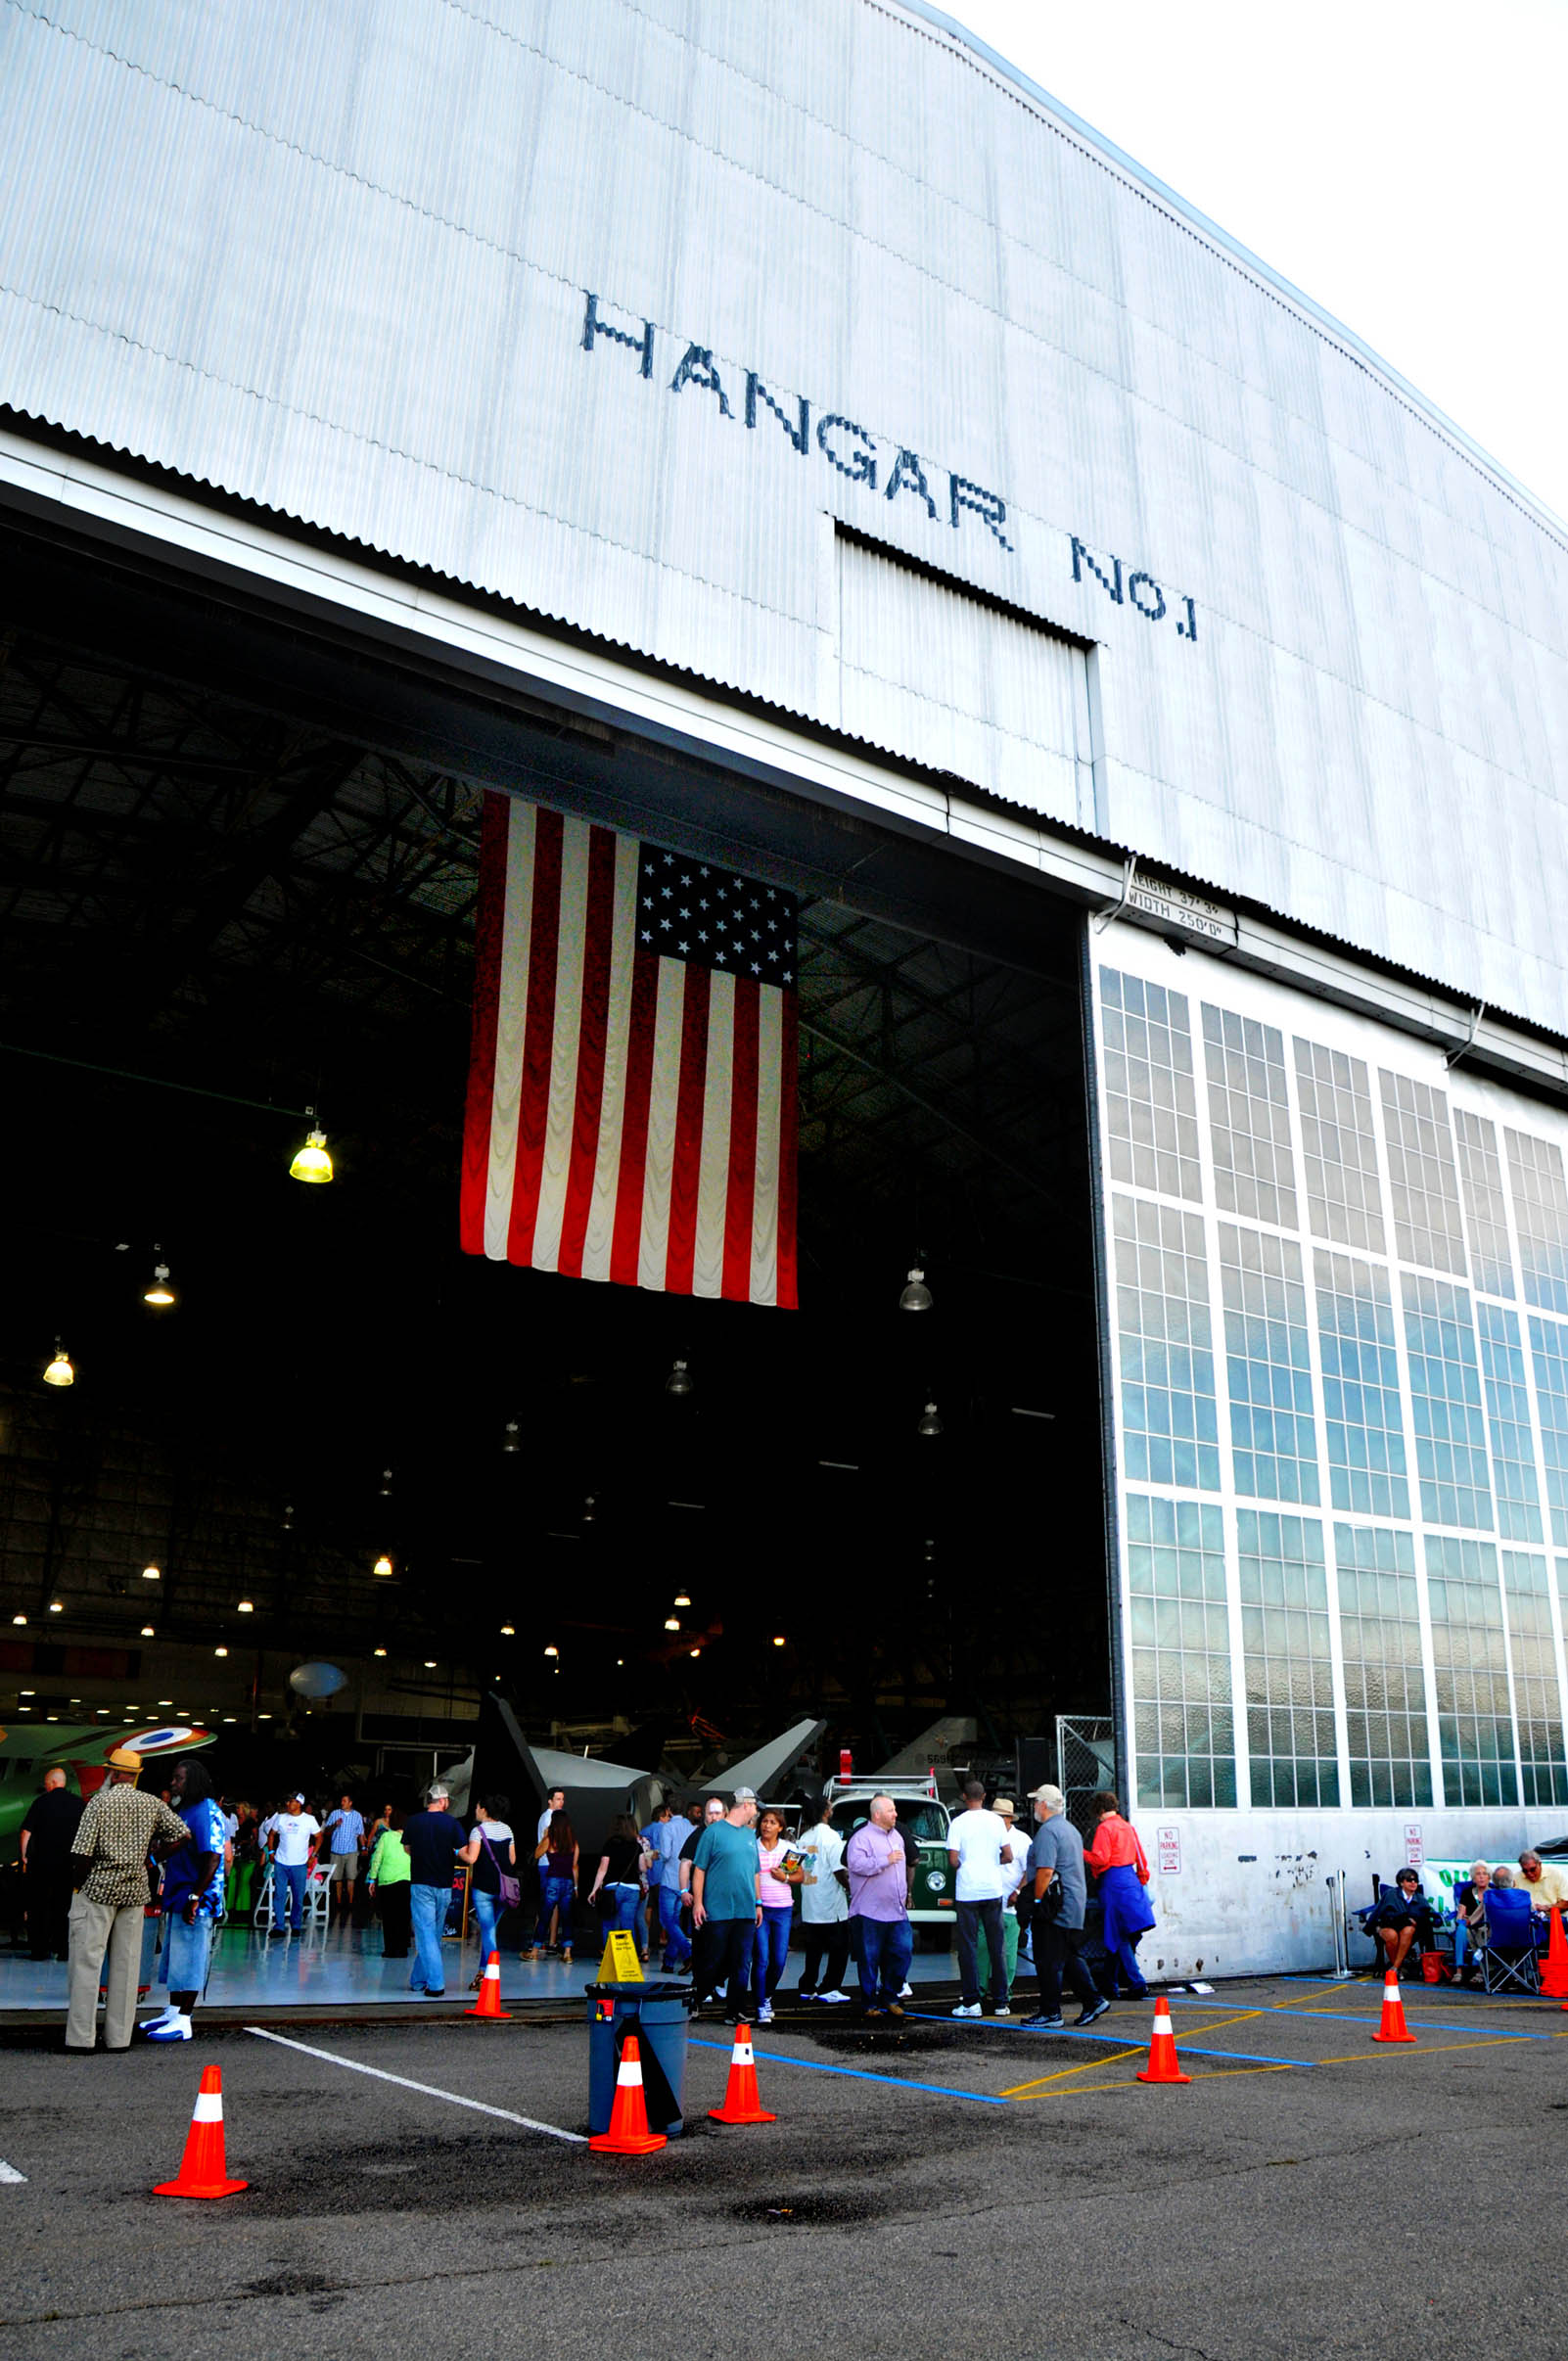 The Hops in the Hangar attracted more than 800 guests (inside and outside)